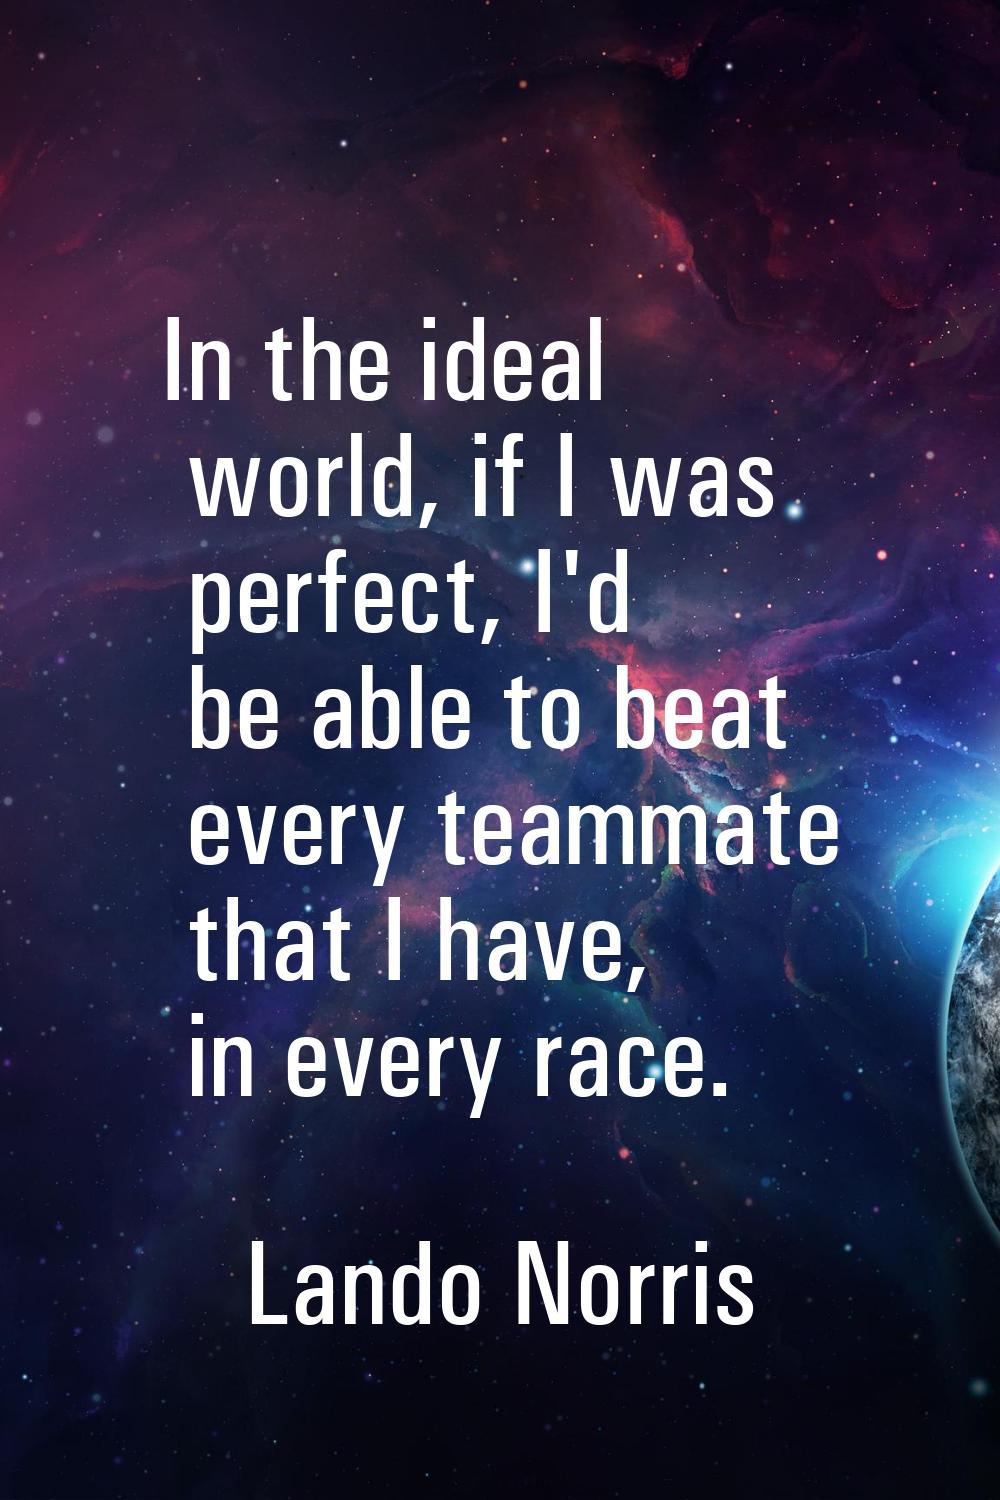 In the ideal world, if I was perfect, I'd be able to beat every teammate that I have, in every race